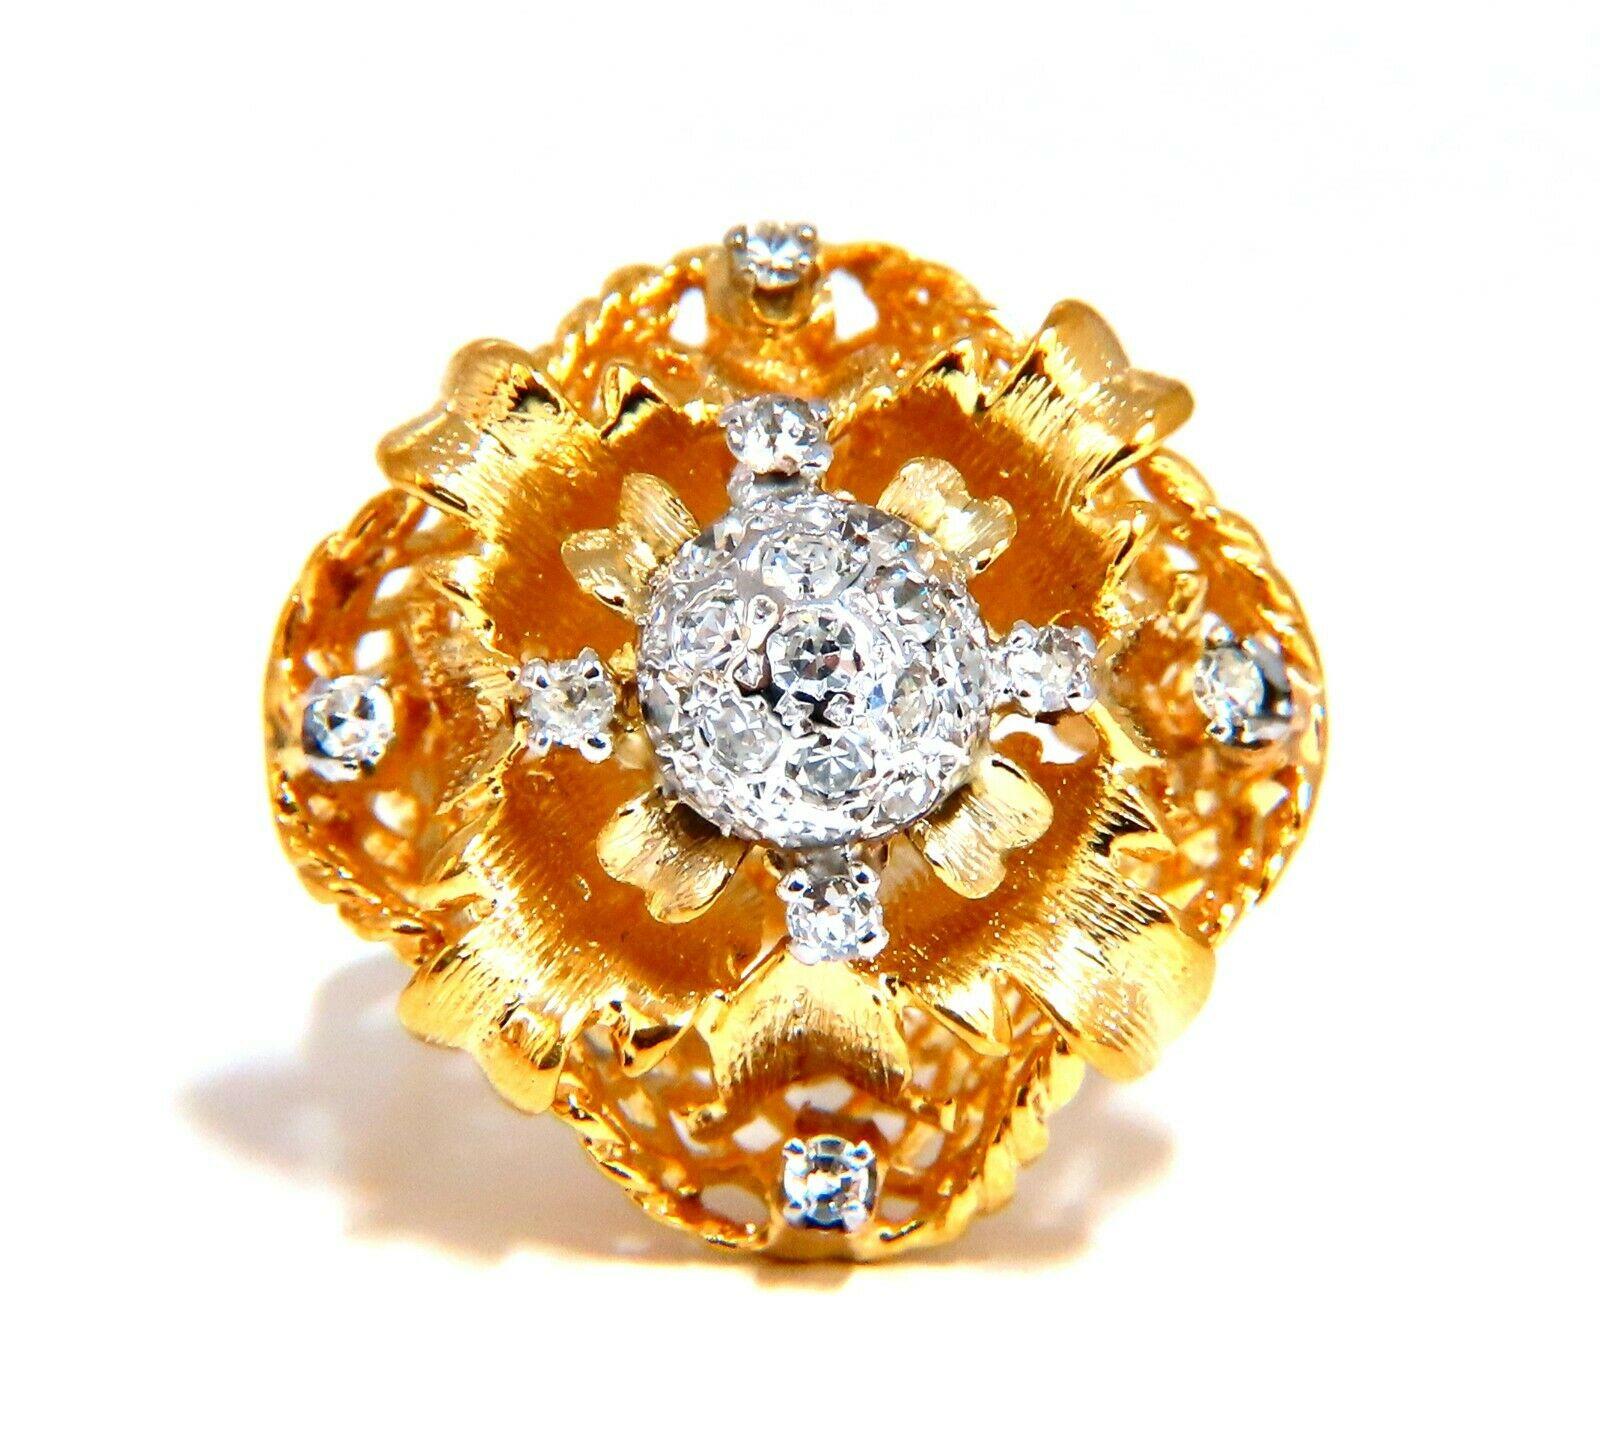 Classic Filigree 

.30ct  Natural Round Cut Diamonds. 

Vs-2 clarity H color.

14kt yellow gold

7.4 Grams

Overall ring: 20mm wide

Depth: 14mm

Current ring size: 7

May professionally resize, please inquire.